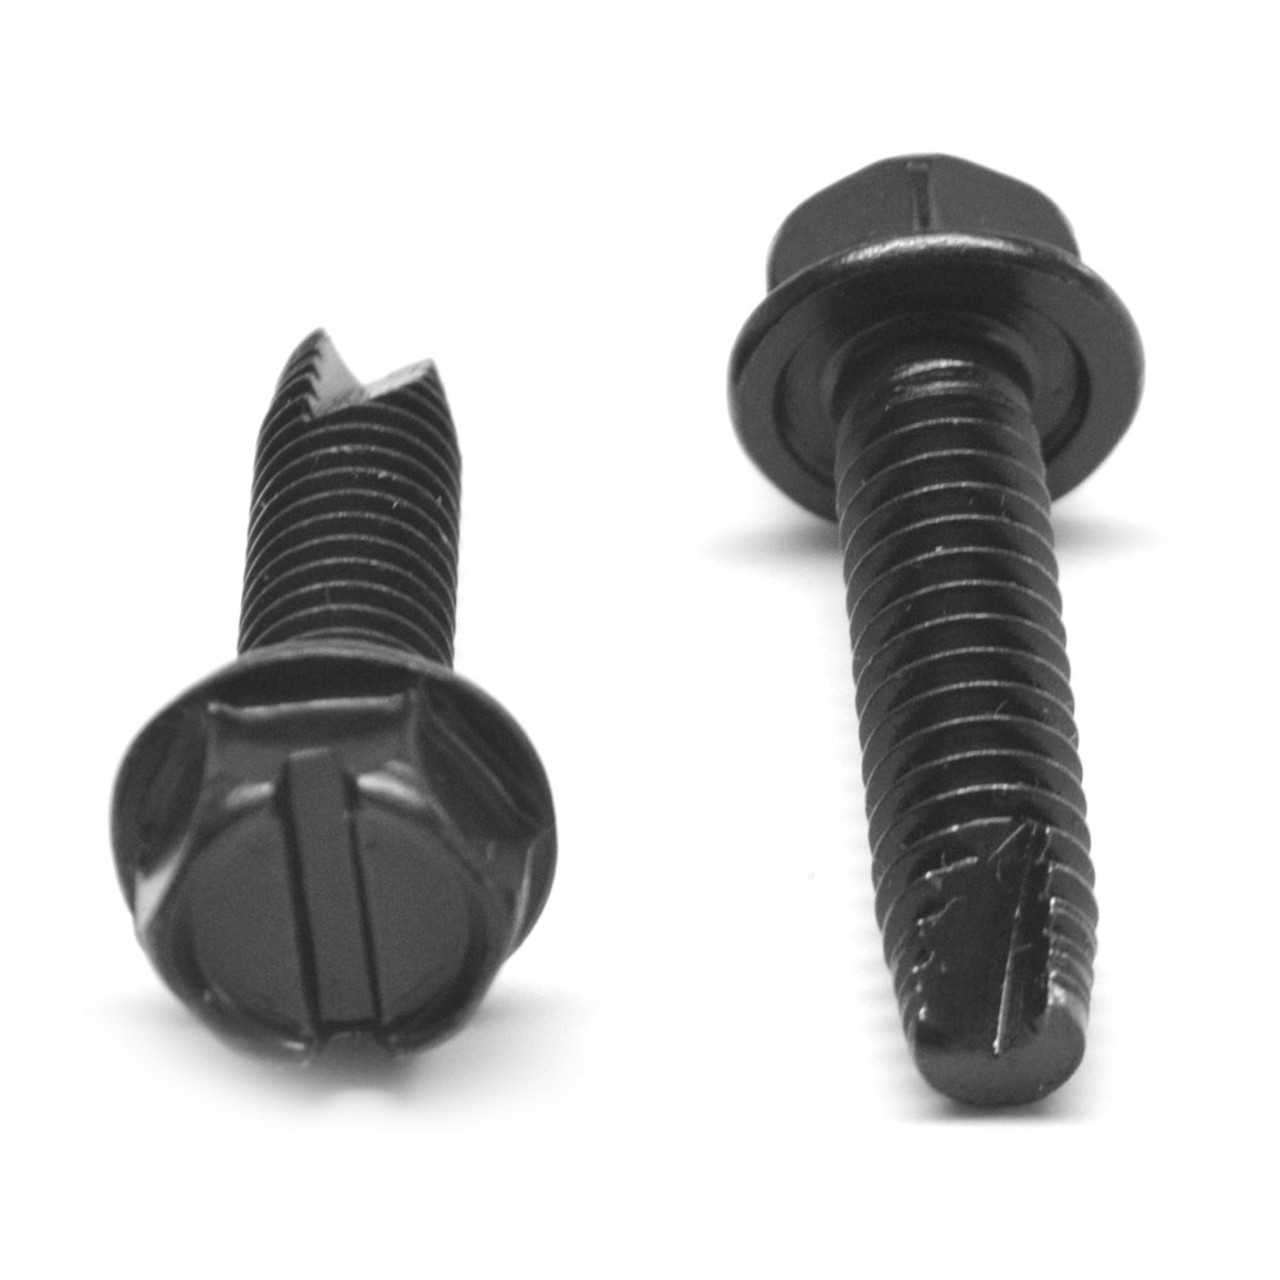 #10-32 x 3/8" (FT) Fine Thread Thread Cutting Screw Slotted Hex Washer Head Type 23 Low Carbon Steel Black Oxide